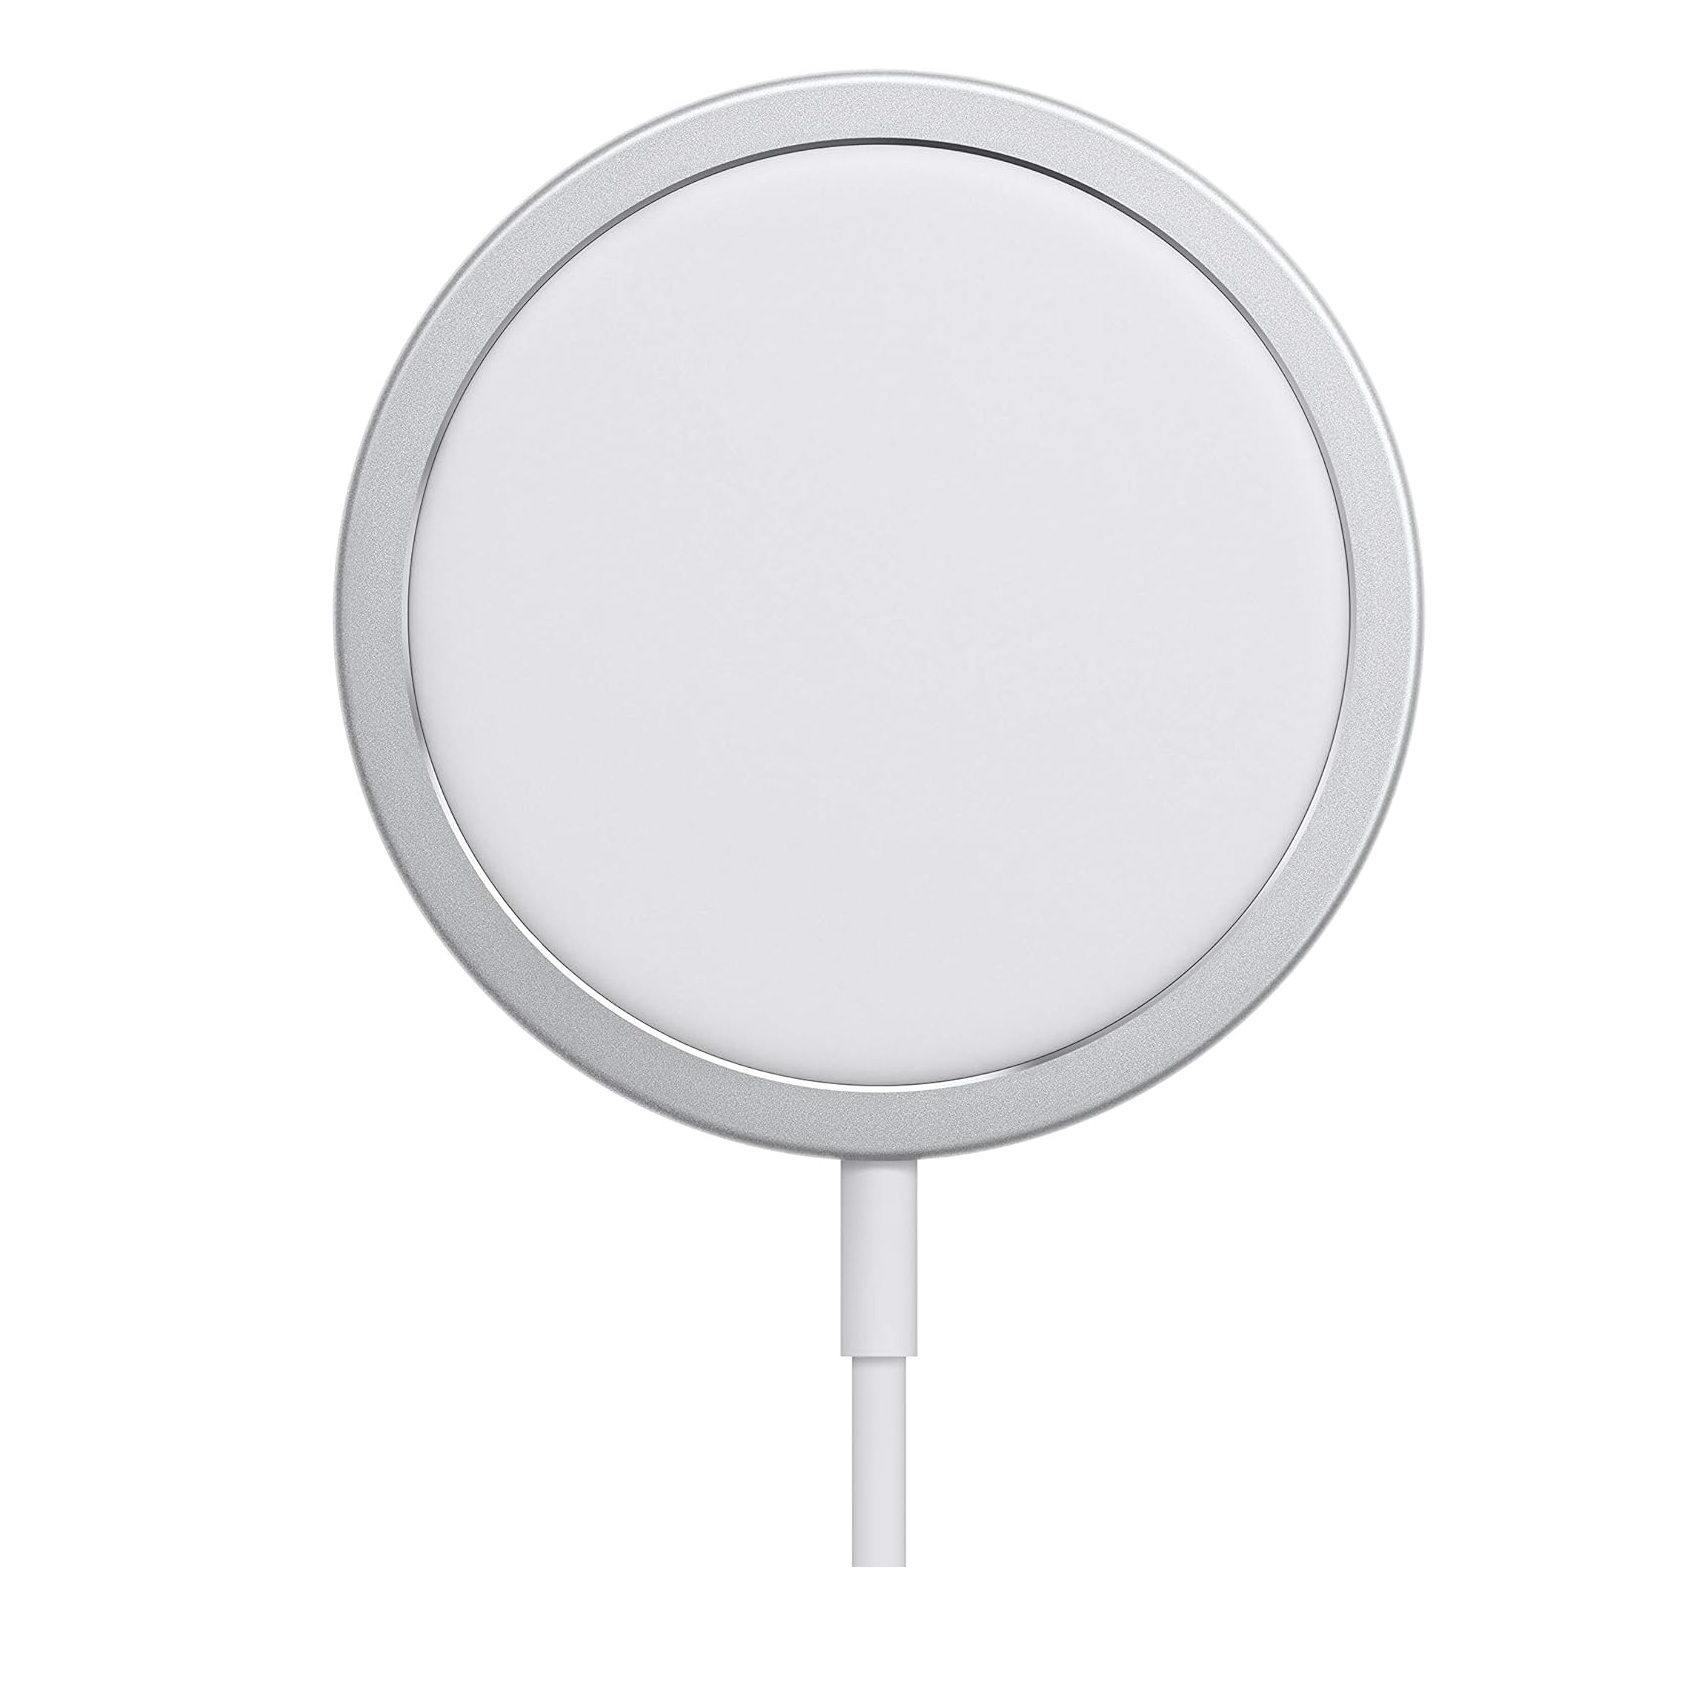 Apple MagSafe Charger on white background.